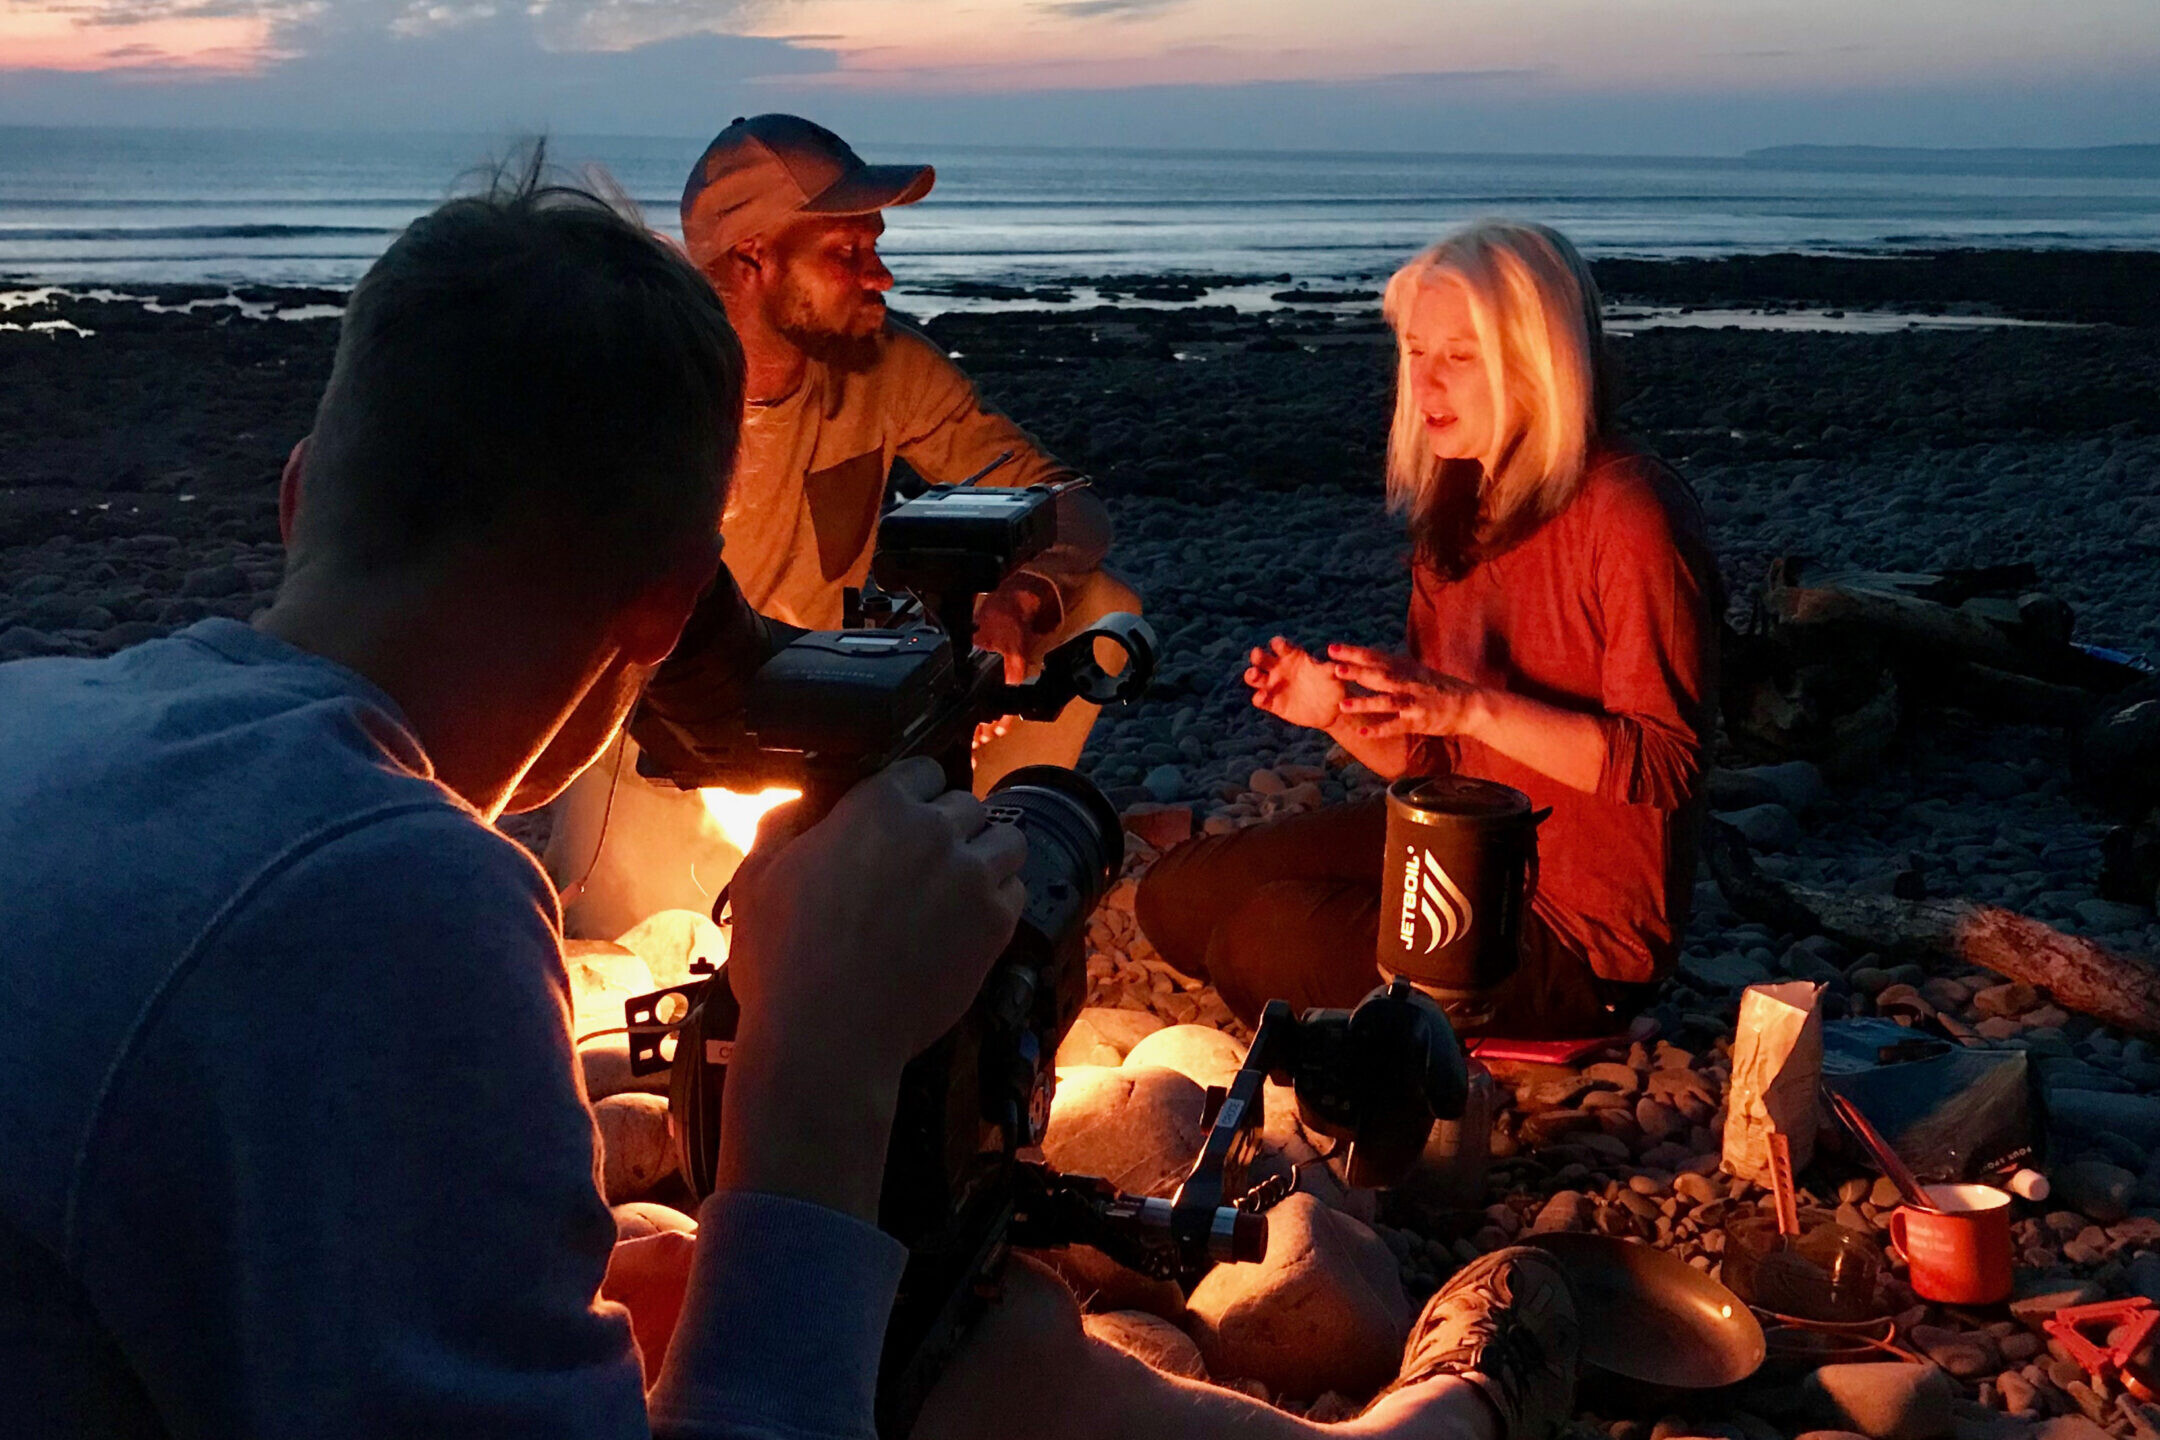 Phoebe Smith and Dwayne Fields sit by a fire on a beach